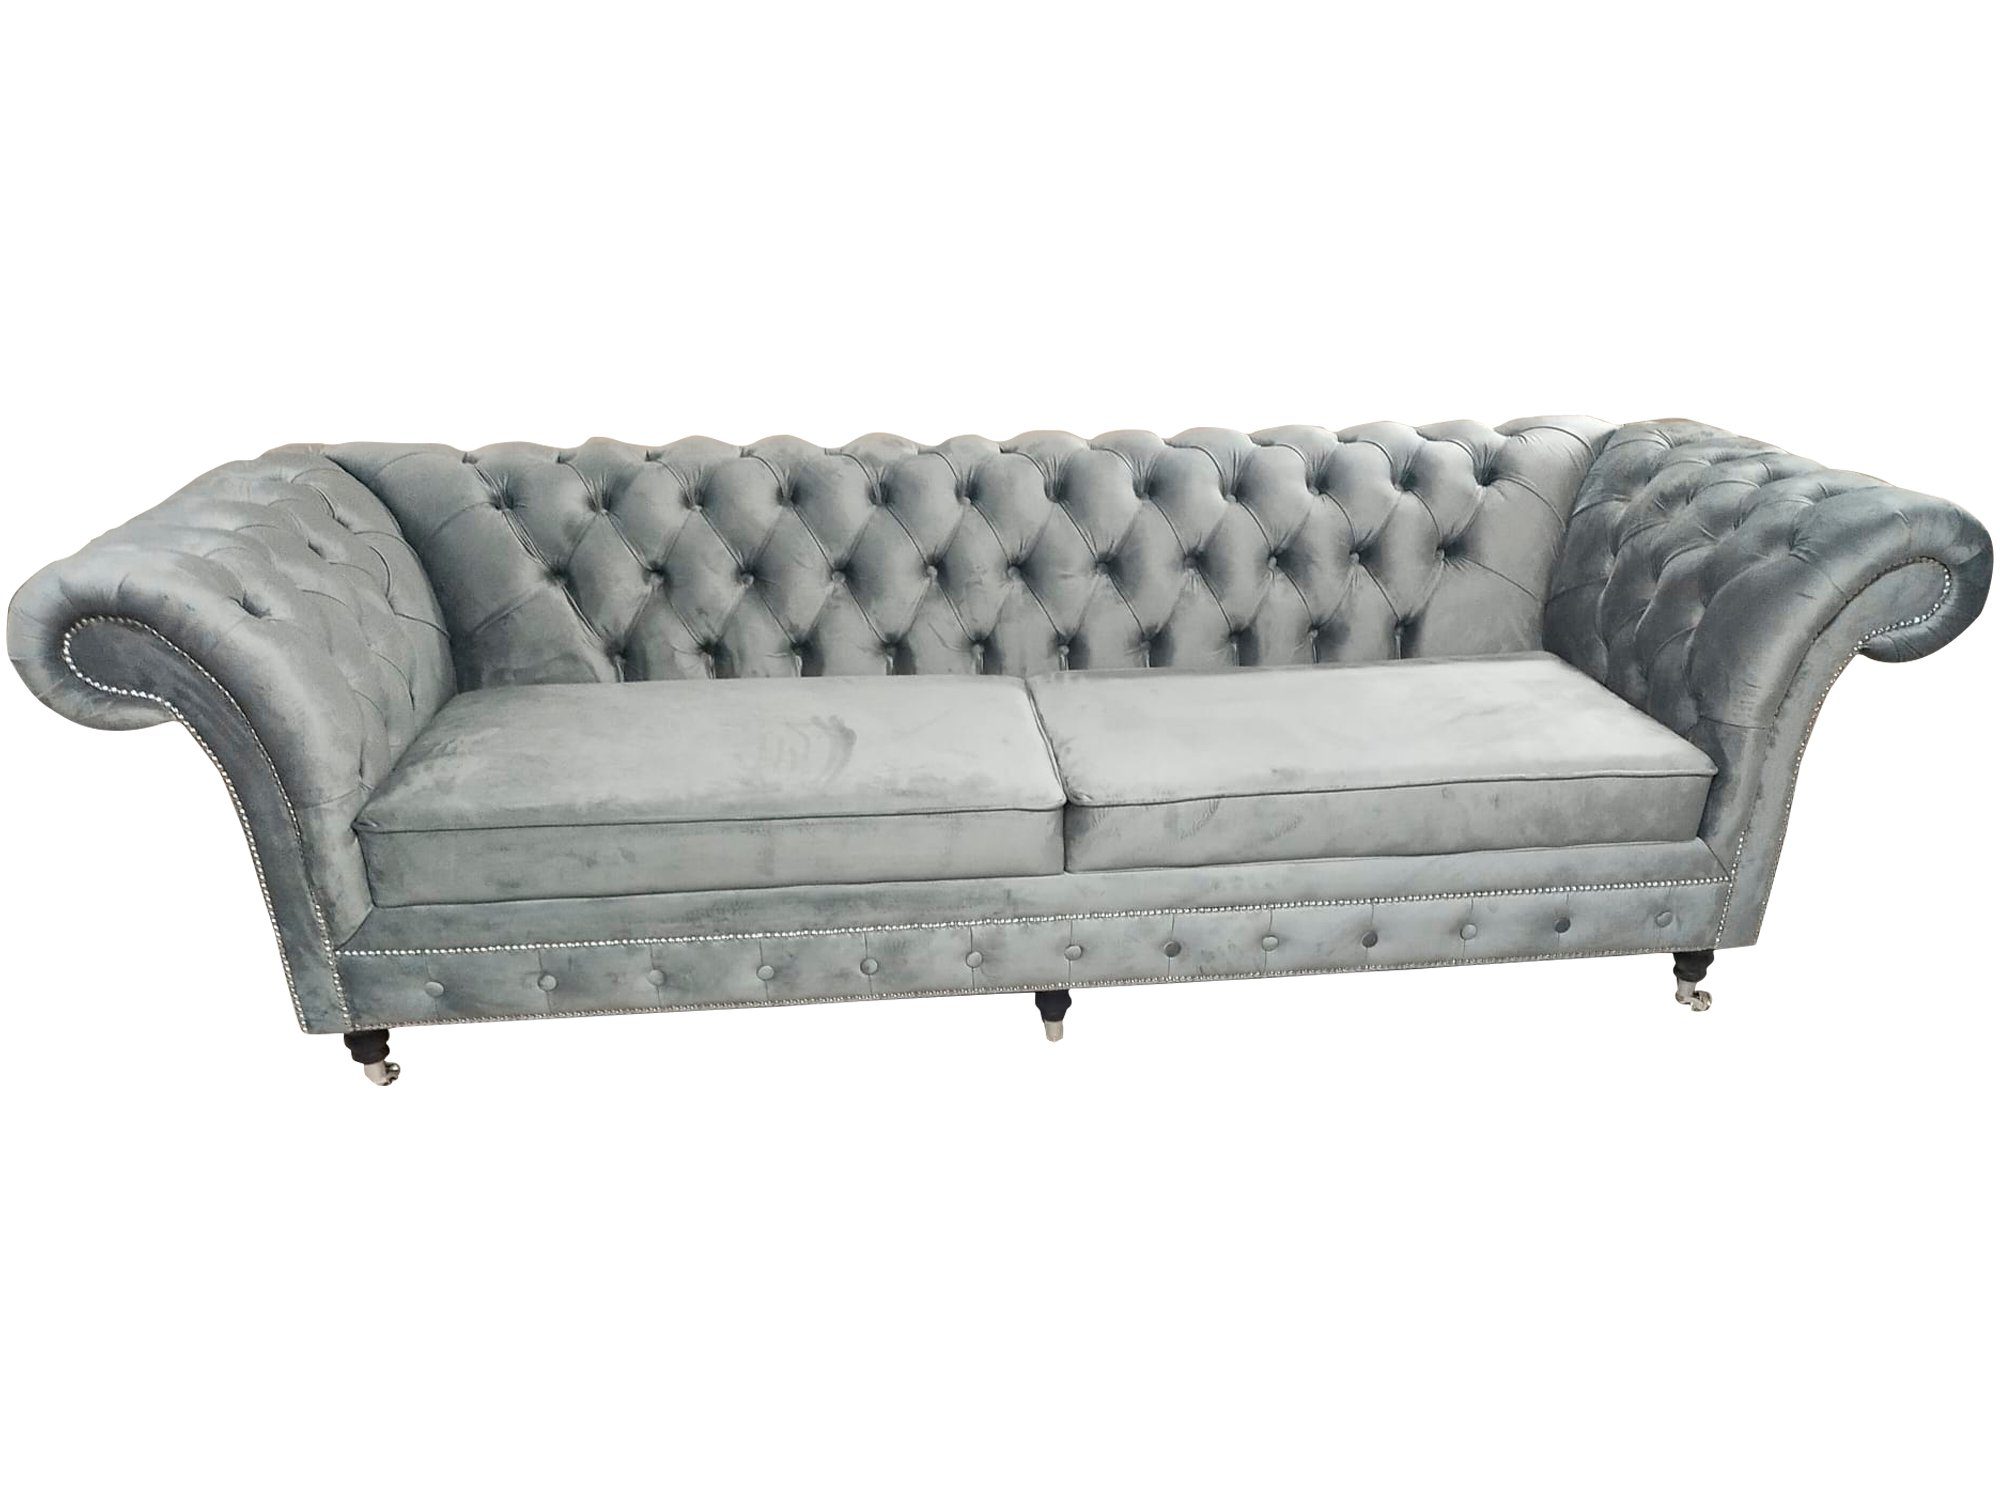 Sitzer Chesterfield Sofa, Sofas Textil Couch Polster 3 JVmoebel Stoff Couchen Sofa